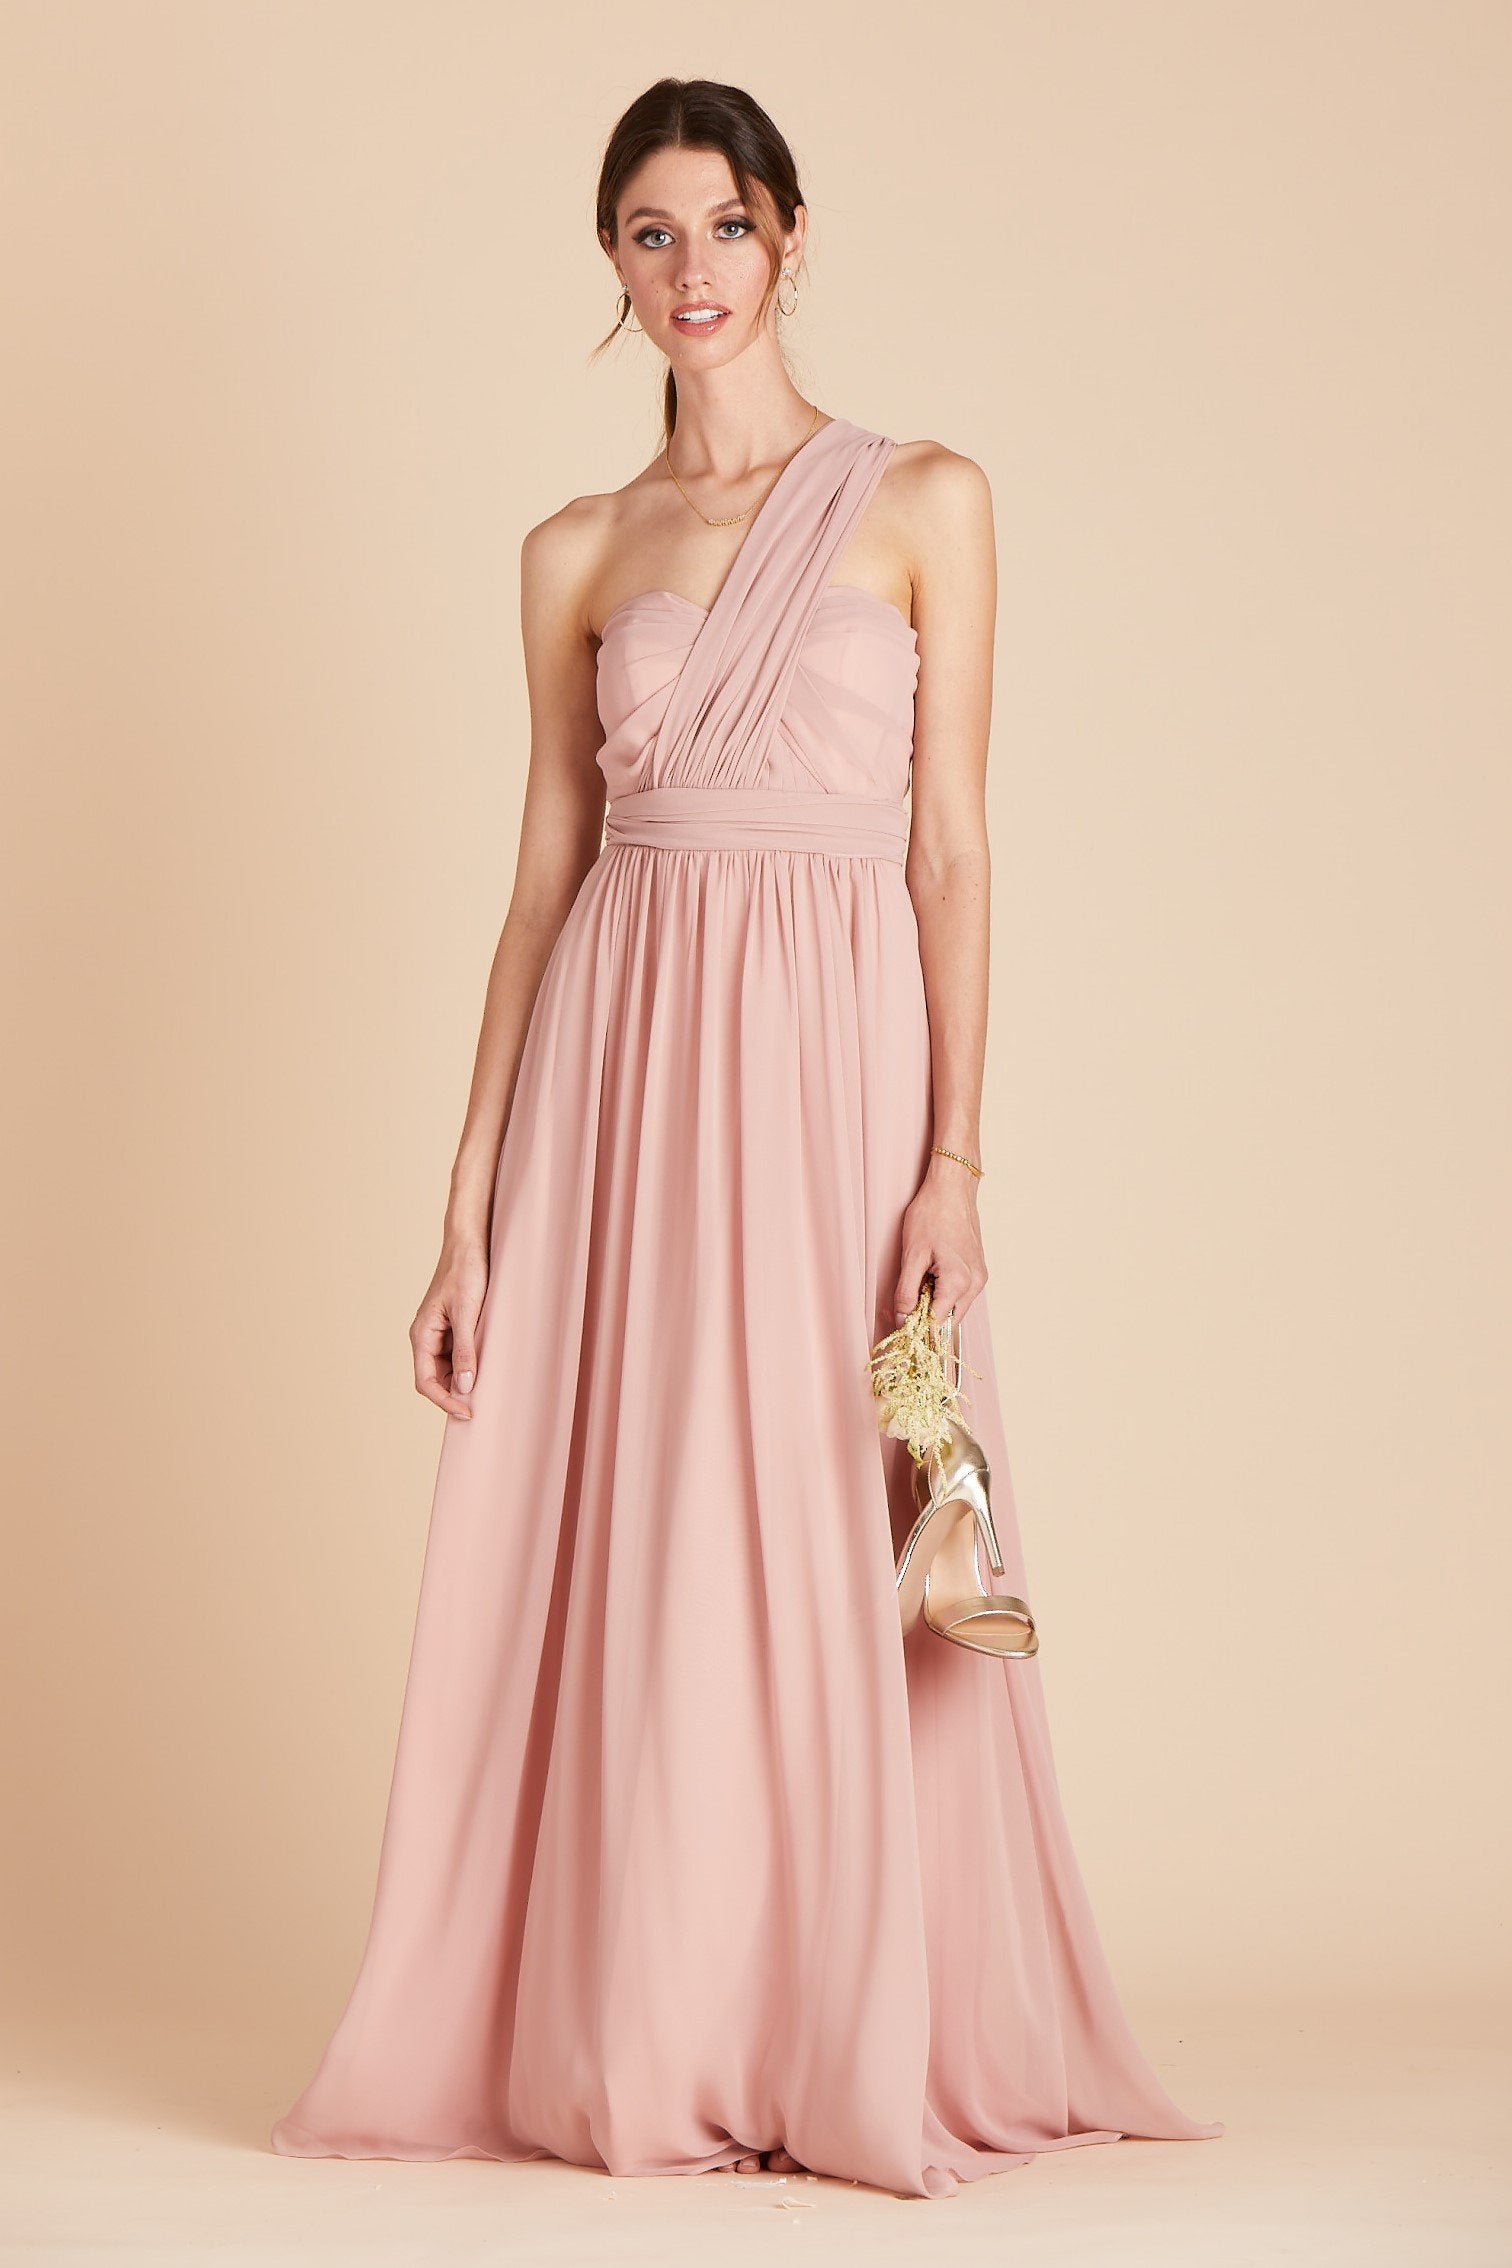 Bridesmaid Dress Color Swatch - Chiffon in Dusty Rose